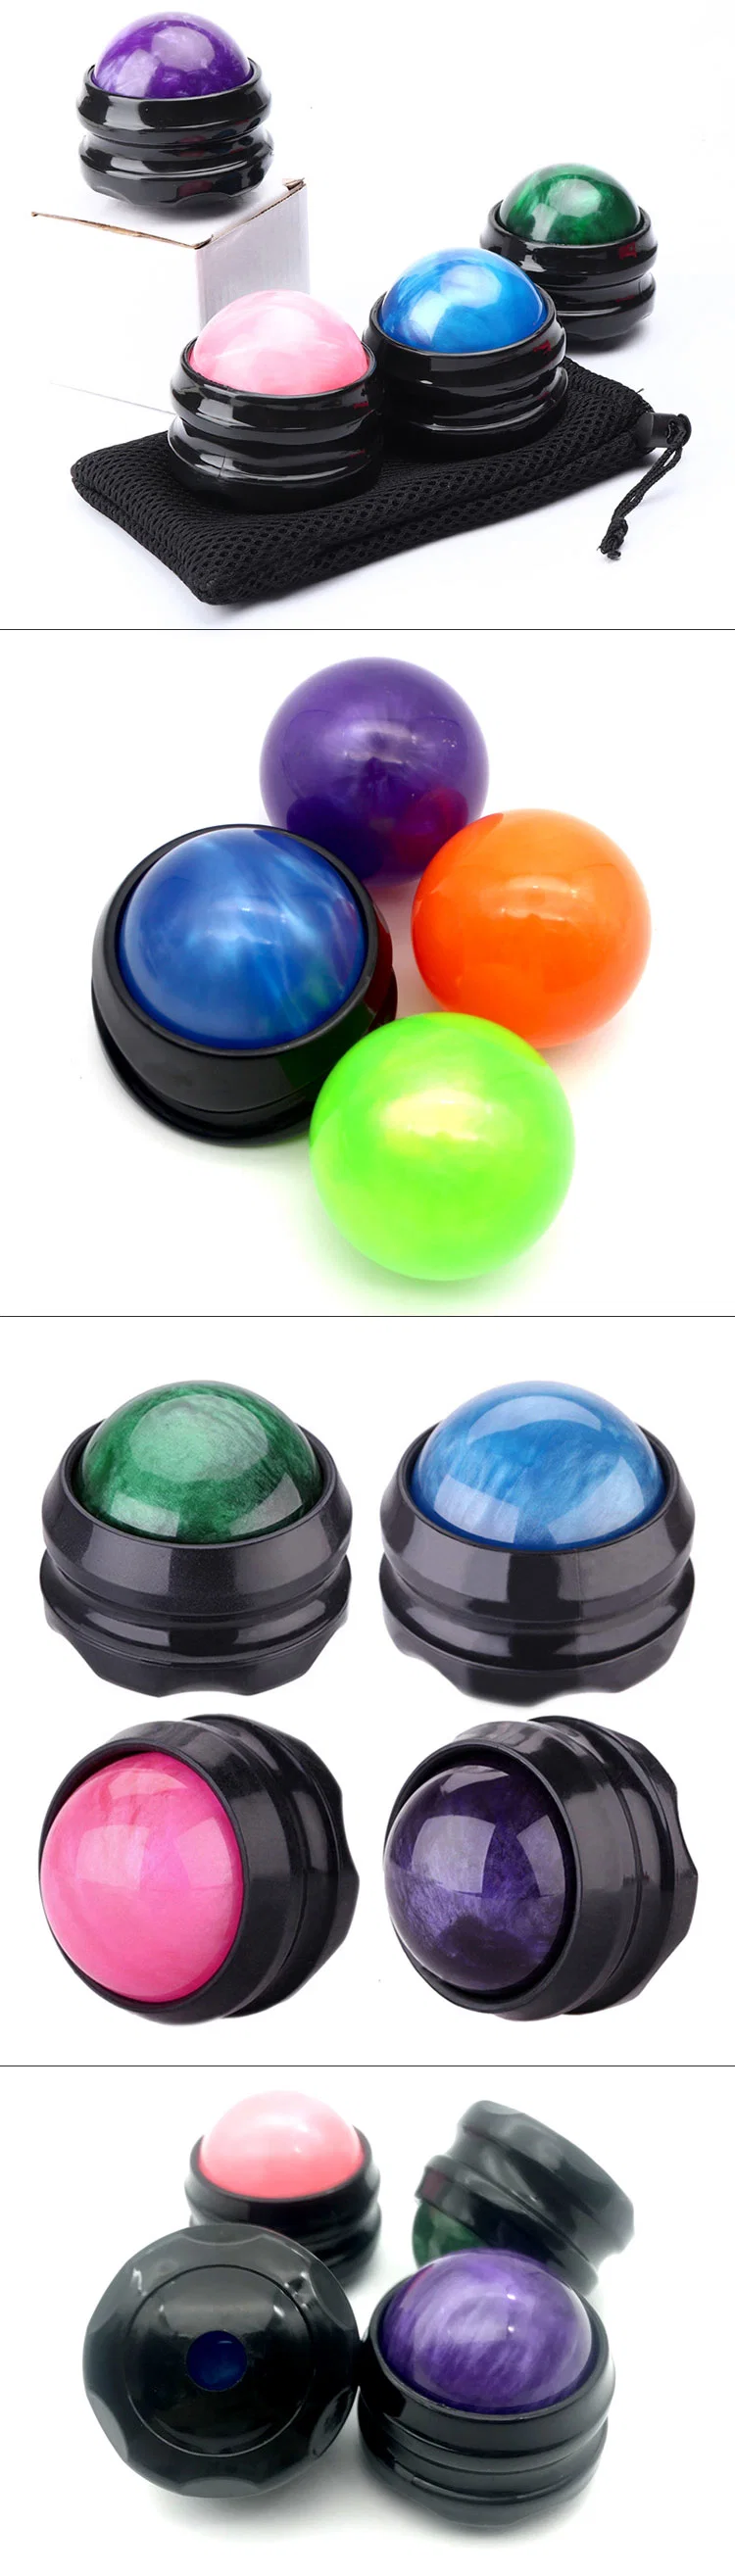 OEM Stainless Steel Relieve Muscle Colorful Cold Massage Roller Ball